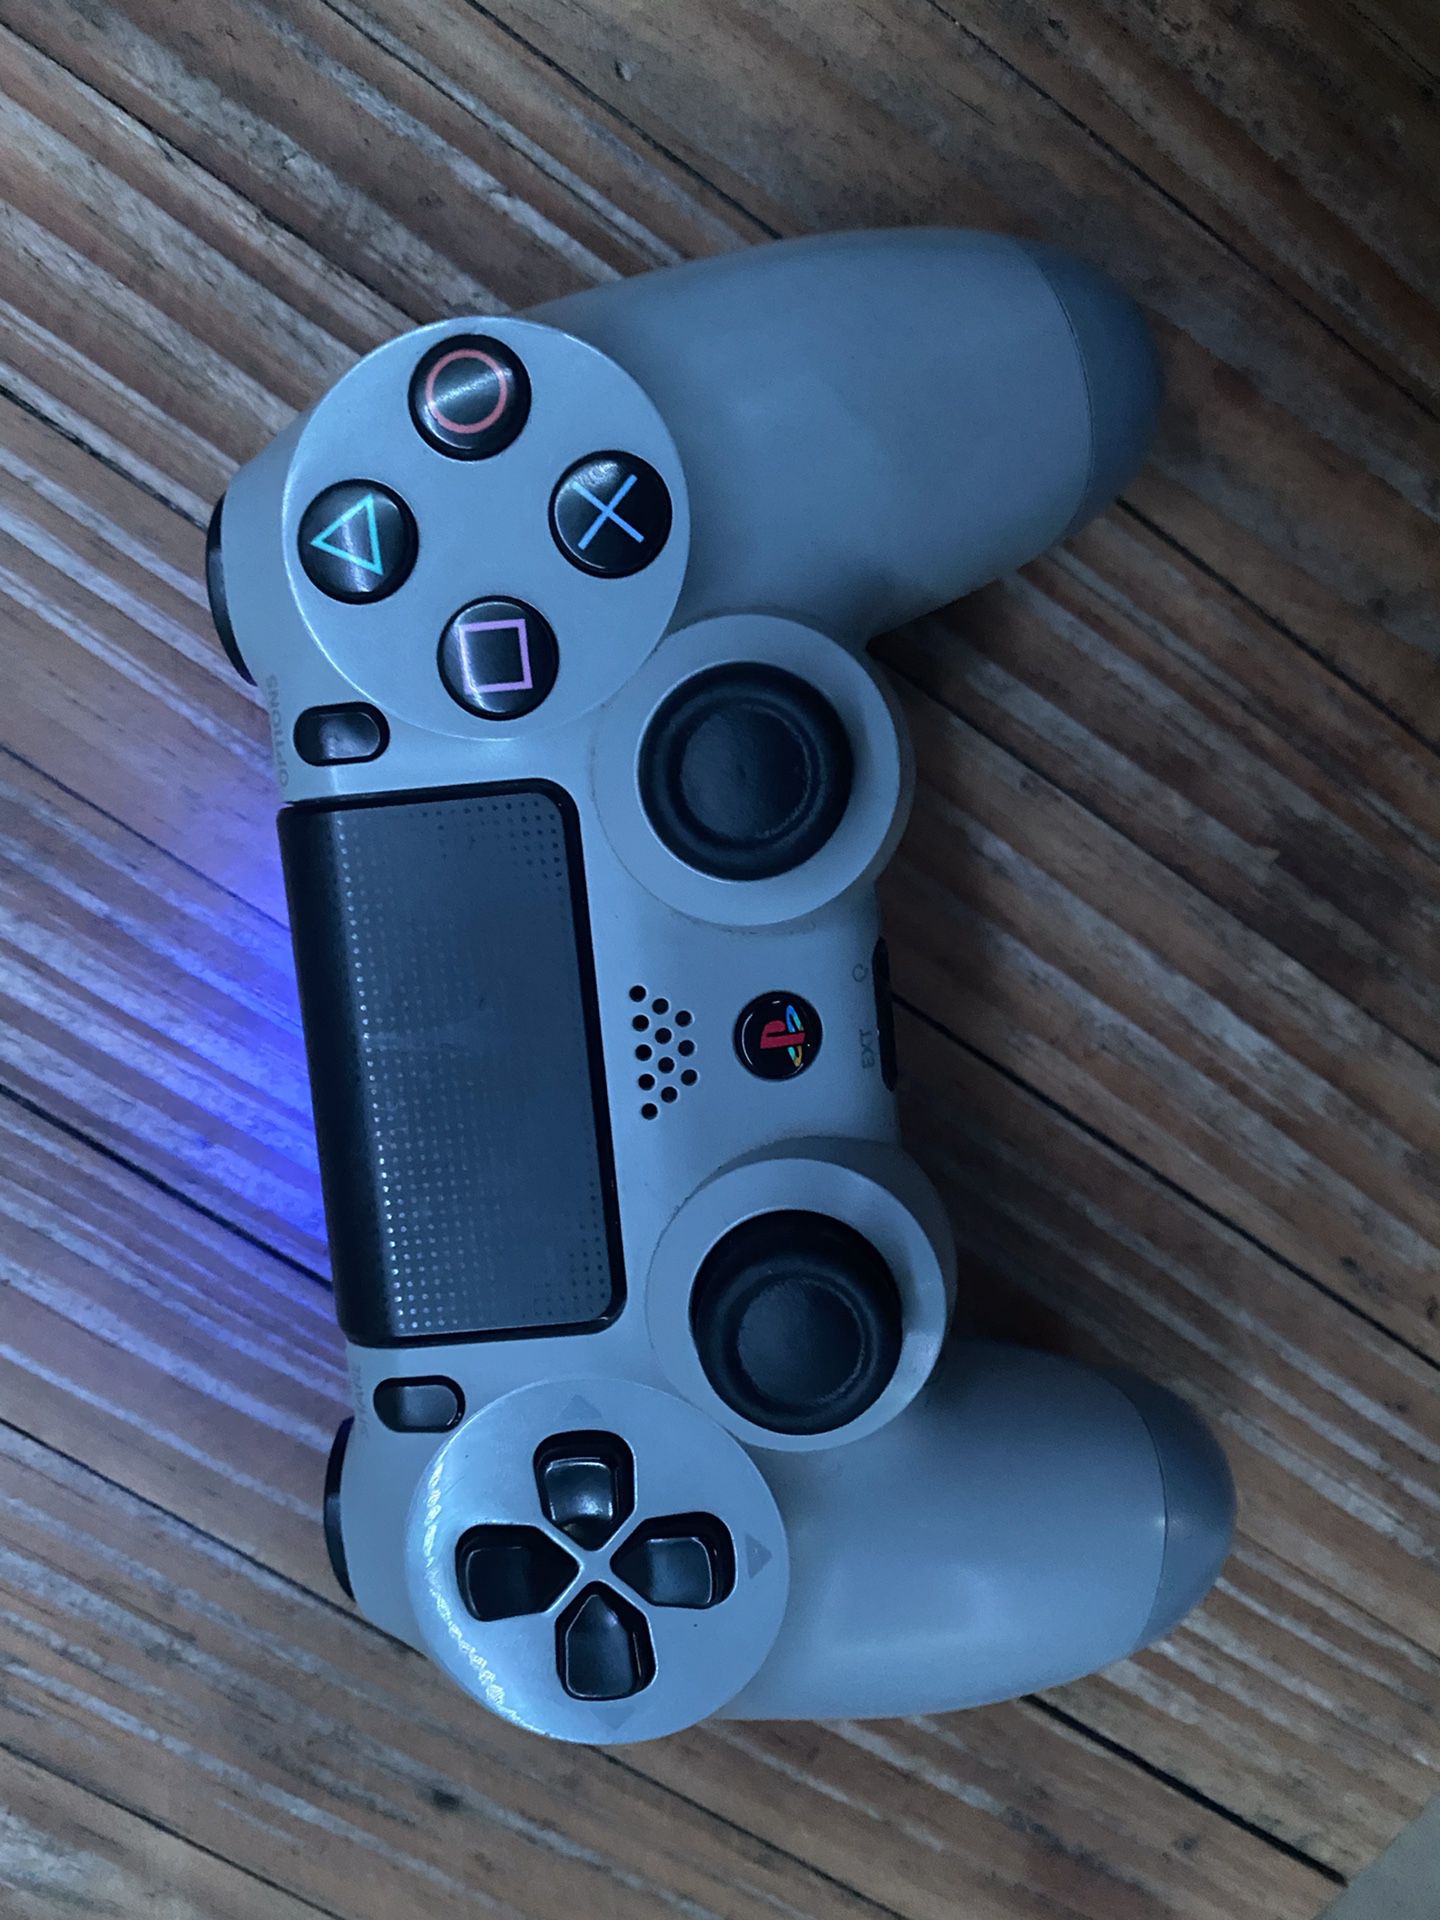 Ps4 controller 20th anniversary